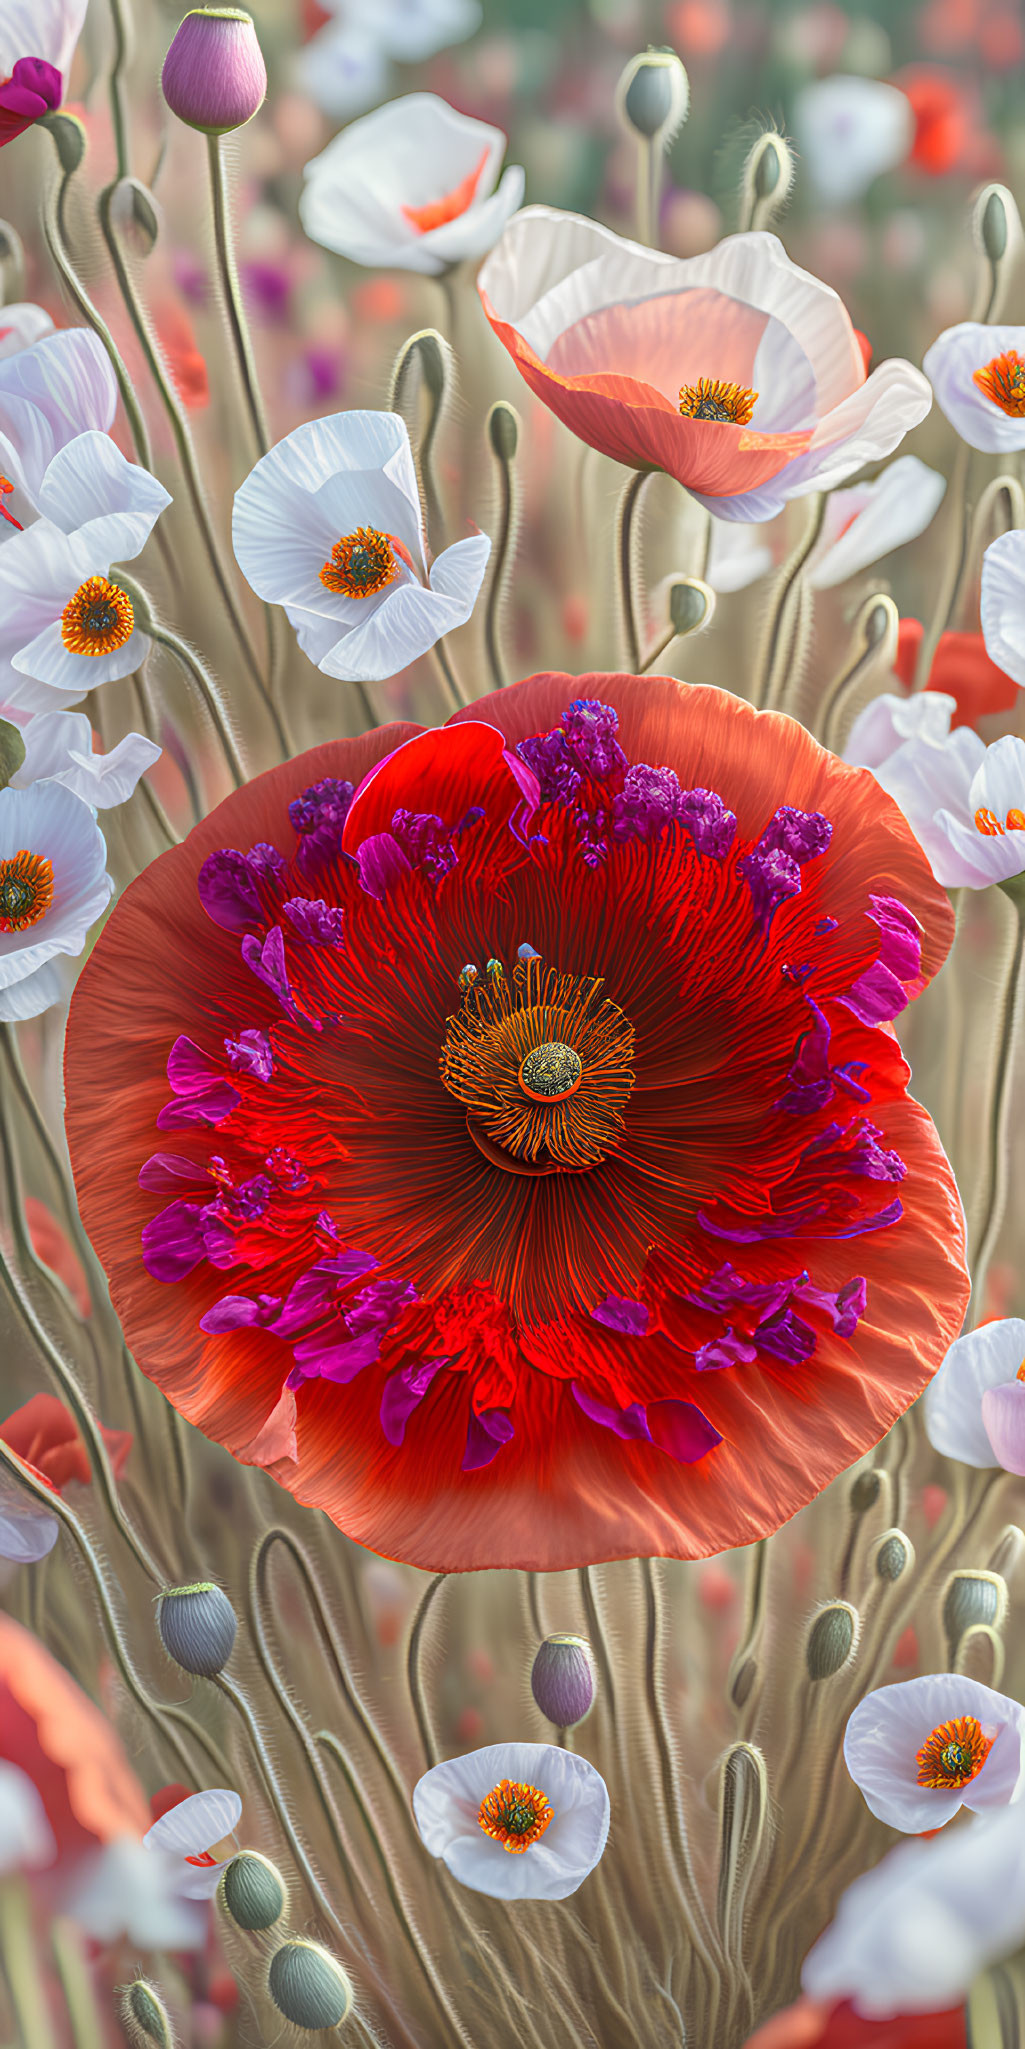 Detailed red poppy among white poppies in soft focus background